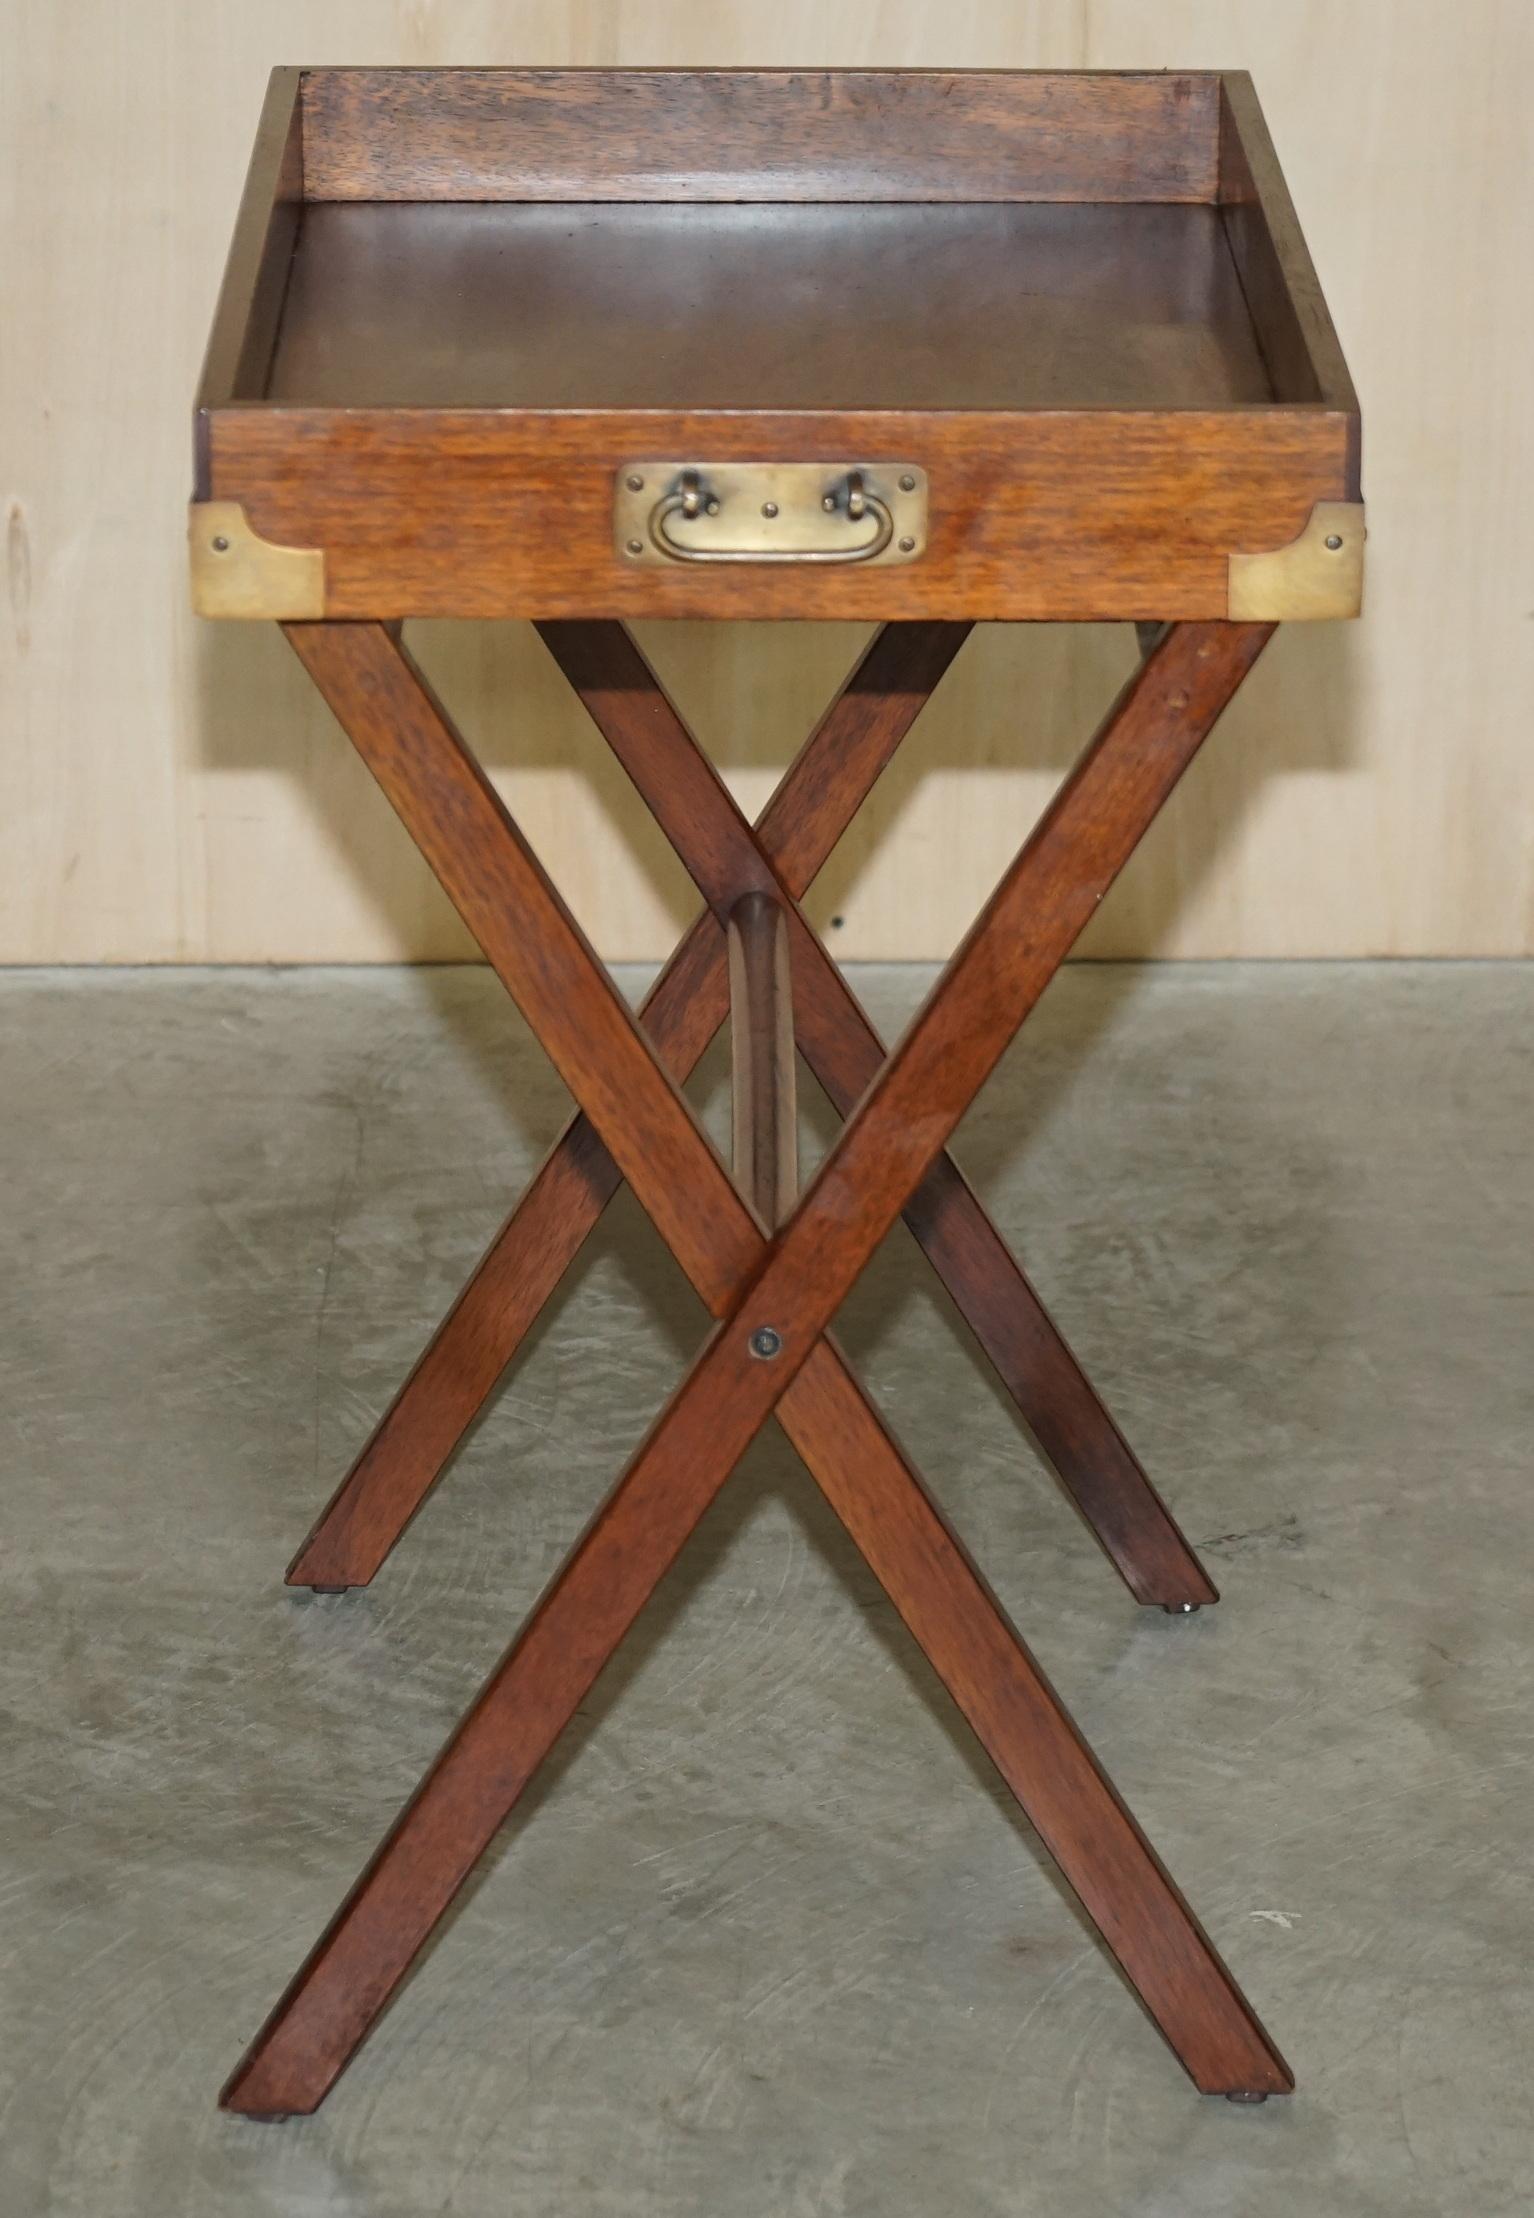 20th Century Vintage Hardwood Folding Campaign Tray Table with Removable Top for Butlers